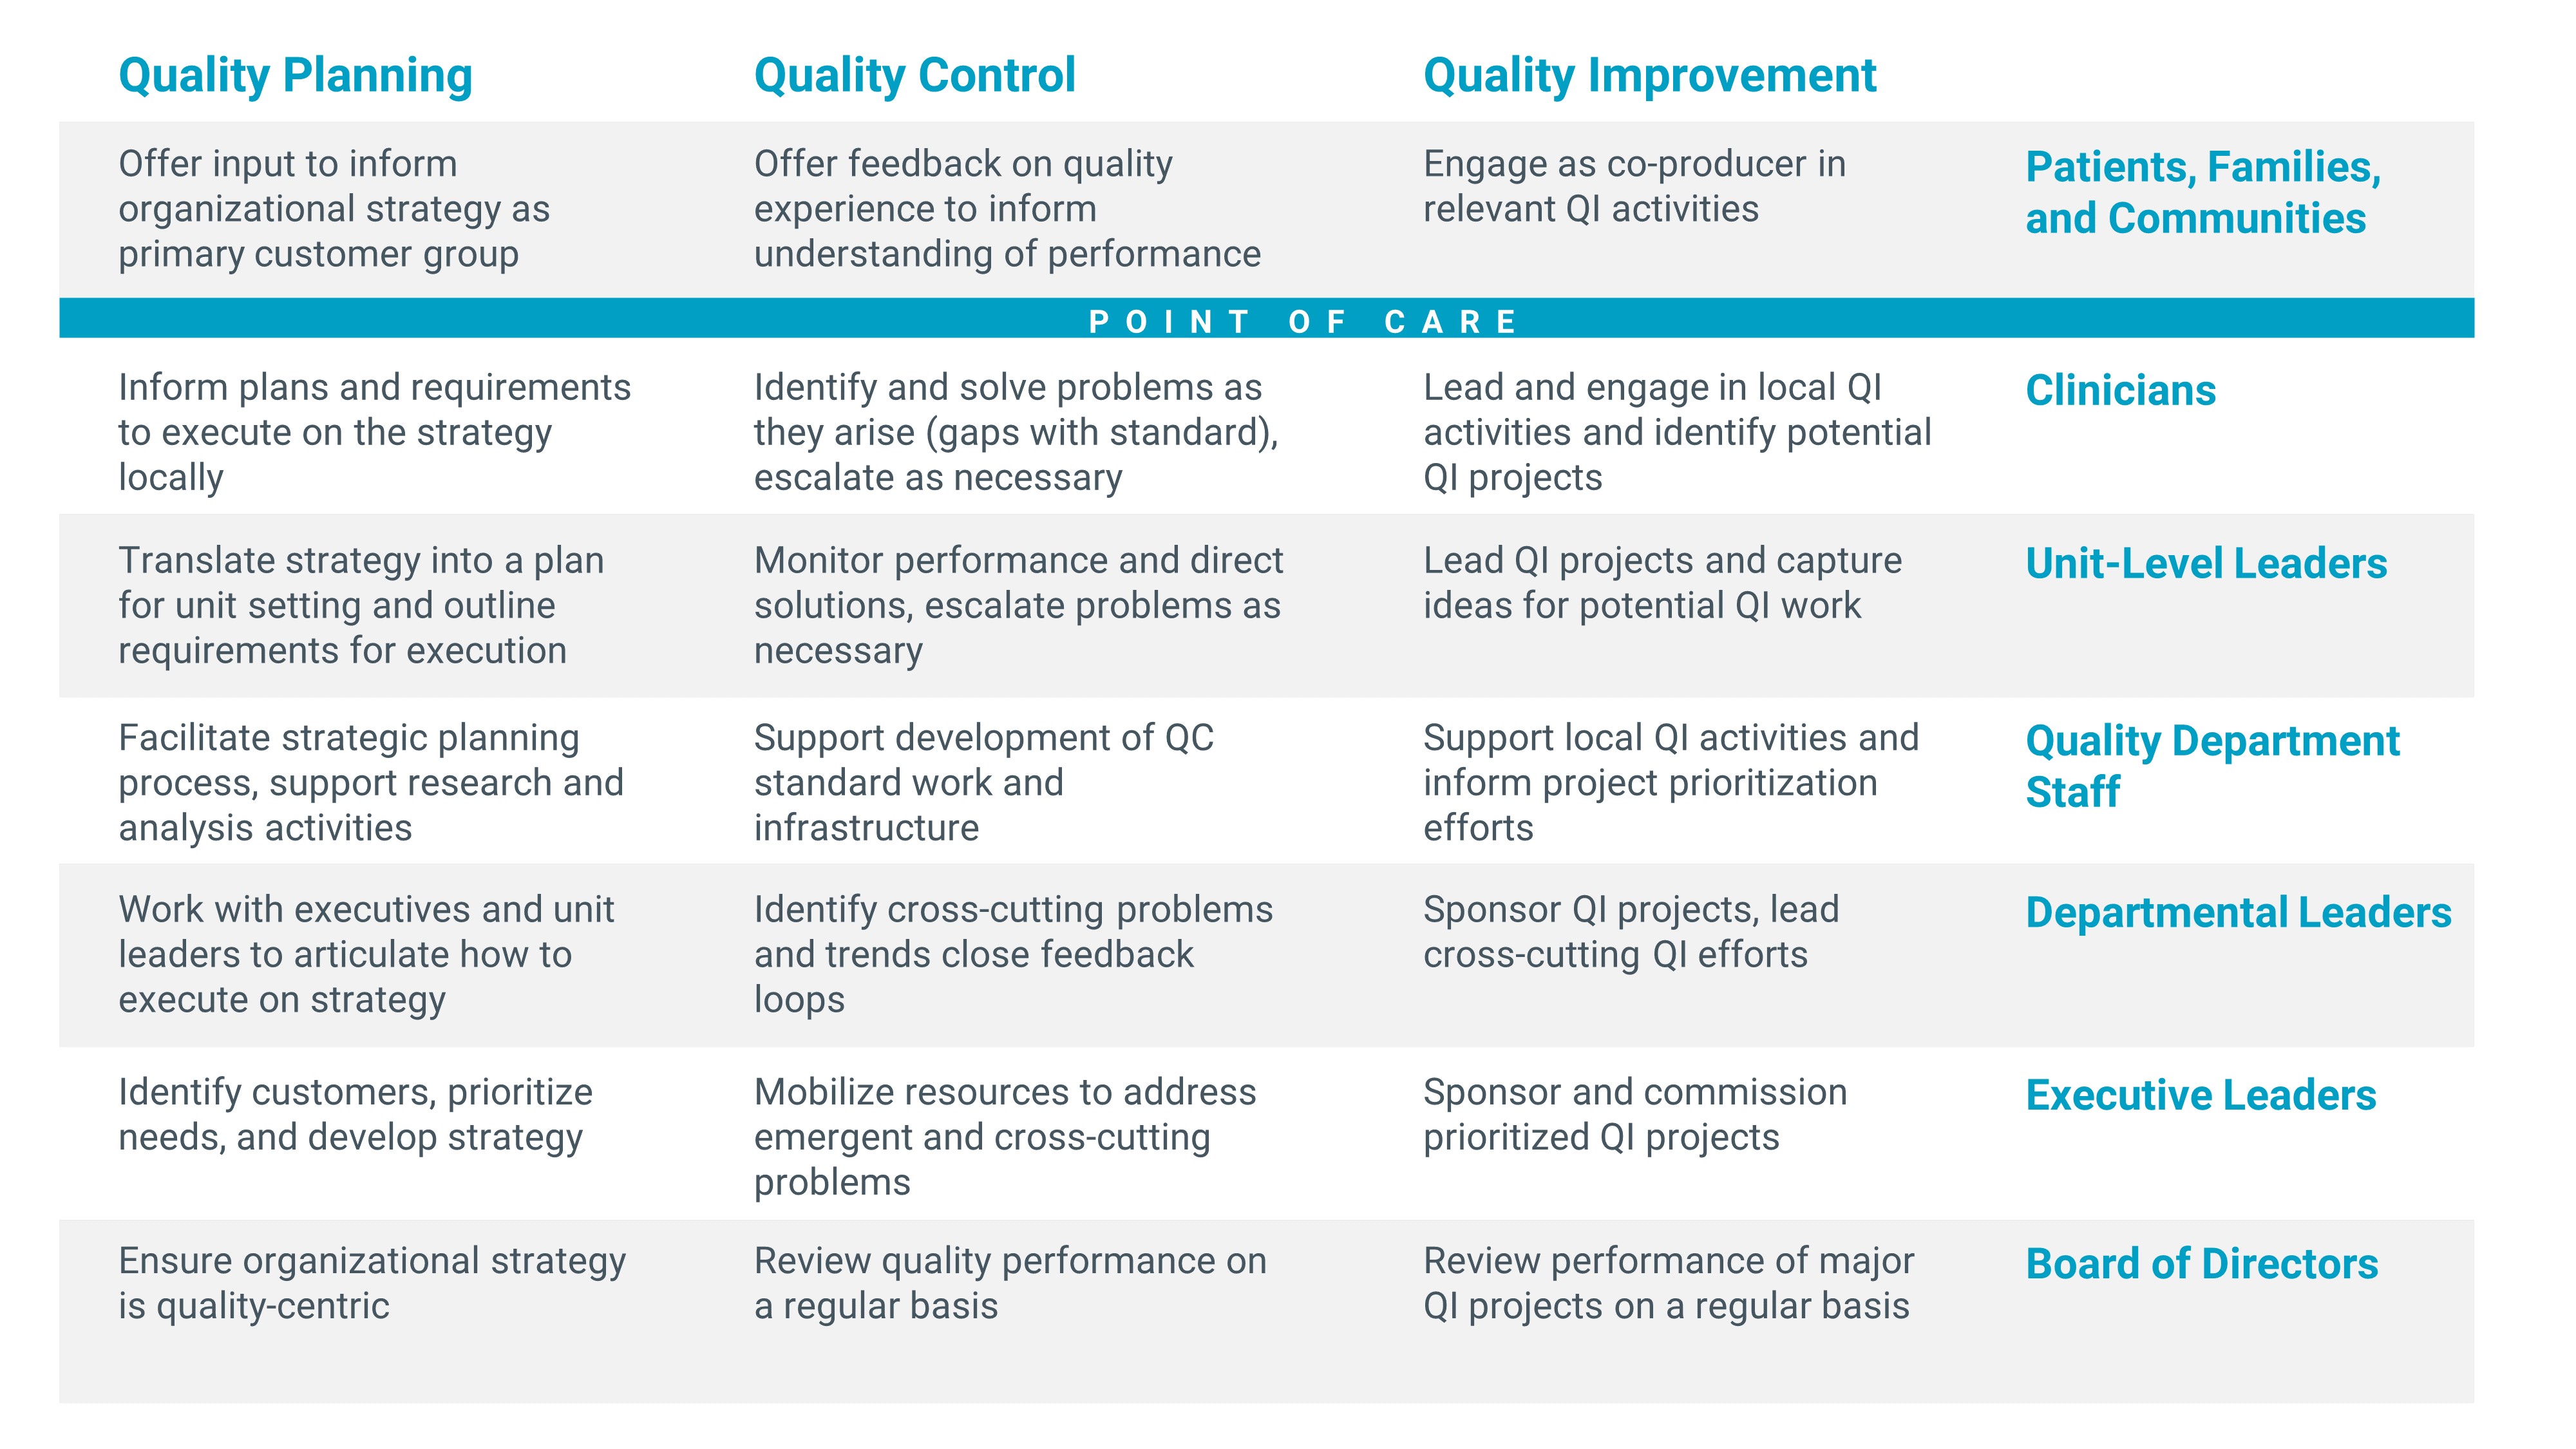 Whole System Quality Approach: Quality Planning, Quality Control, and Quality Improvement Activities by Stakeholder Group